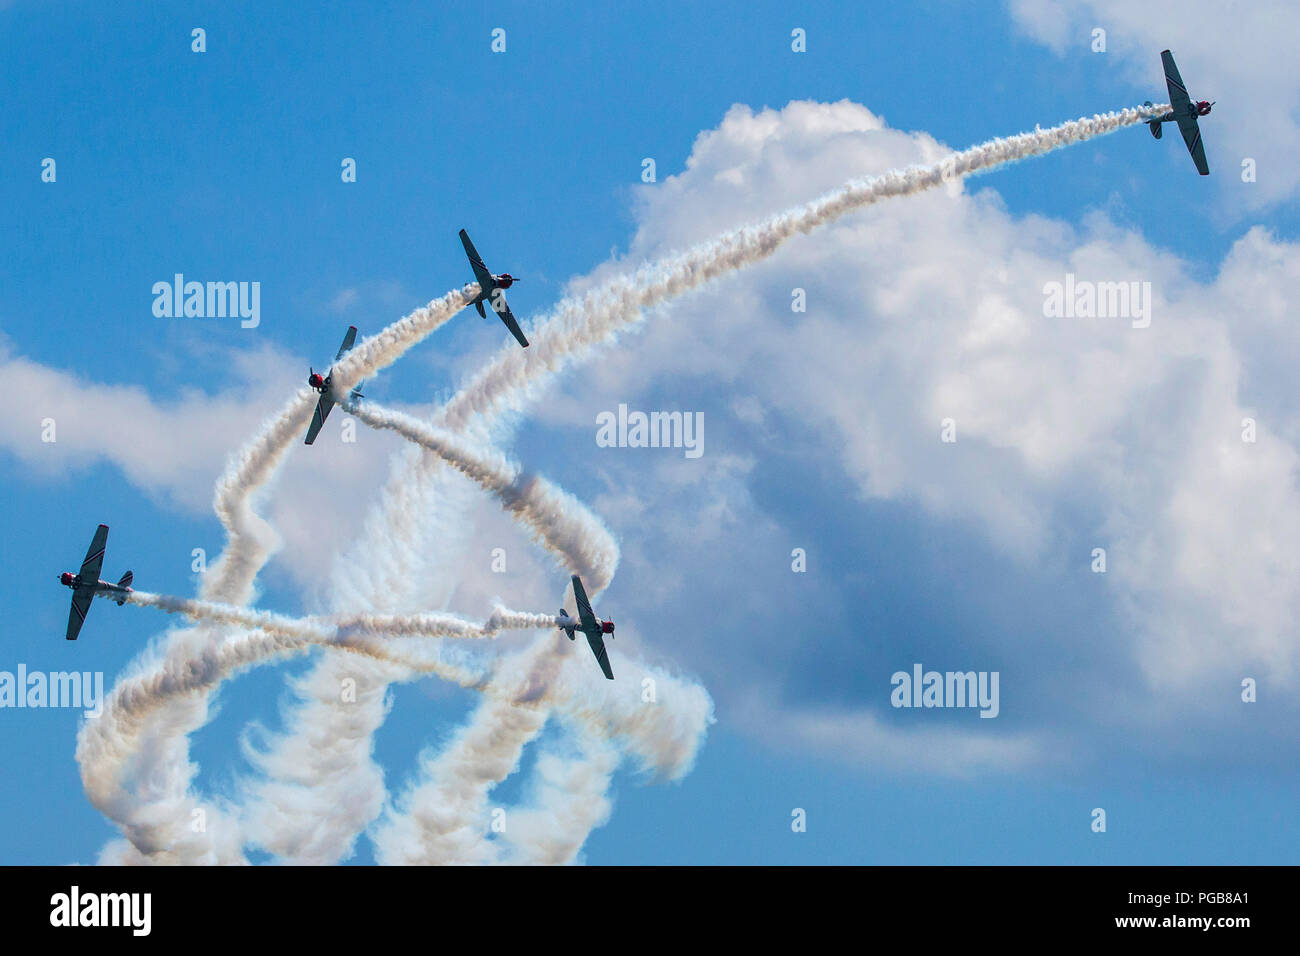 The GEICO Skytypers SNJ-2 Texans perform at the 2018 Atlantic City International Airshow “16th Annual Thunder Over The Boardwalk” at Atlantic City, N.J., Aug. 22, 2018. The SNJ-2 is a variant of the T-6 Texan advanced trainer aircraft used to train pilots from World War II until the 1970s. (New Jersey National Guard photo by Mark C. Olsen) Stock Photo